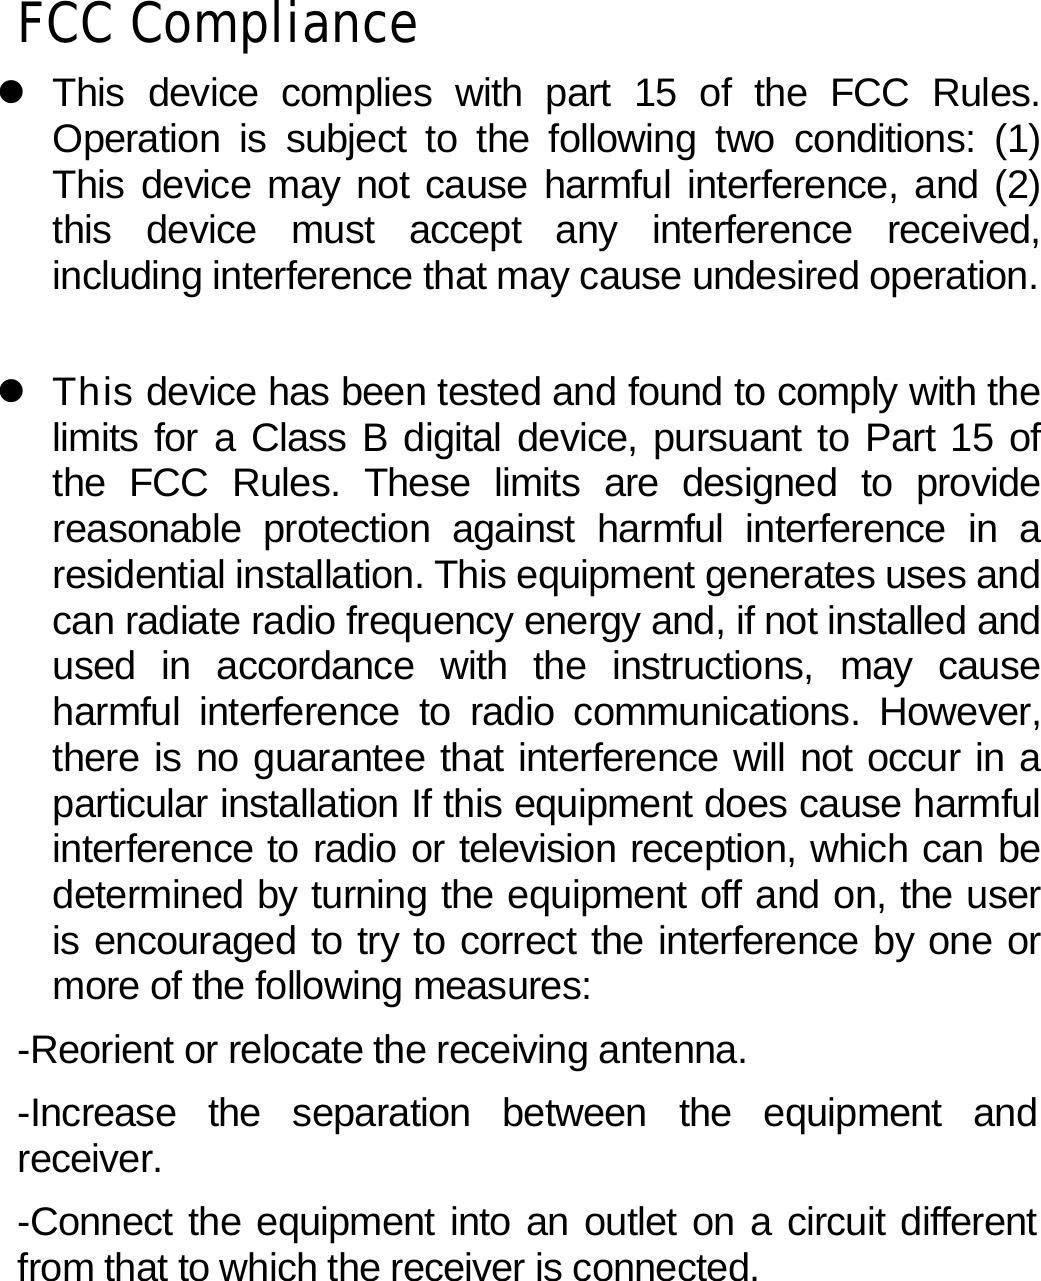 FCC Compliance z This device complies with part 15 of the FCC Rules. Operation is subject to the following two conditions: (1) This device may not cause harmful interference, and (2) this device must accept any interference received, including interference that may cause undesired operation.  z  This device has been tested and found to comply with the limits for a Class B digital device, pursuant to Part 15 of the FCC Rules. These limits are designed to provide reasonable protection against harmful interference in a residential installation. This equipment generates uses and can radiate radio frequency energy and, if not installed and used in accordance with the instructions, may cause harmful interference to radio communications. However, there is no guarantee that interference will not occur in a particular installation If this equipment does cause harmful interference to radio or television reception, which can be determined by turning the equipment off and on, the user is encouraged to try to correct the interference by one or more of the following measures: -Reorient or relocate the receiving antenna. -Increase the separation between the equipment and receiver. -Connect the equipment into an outlet on a circuit different from that to which the receiver is connected.  